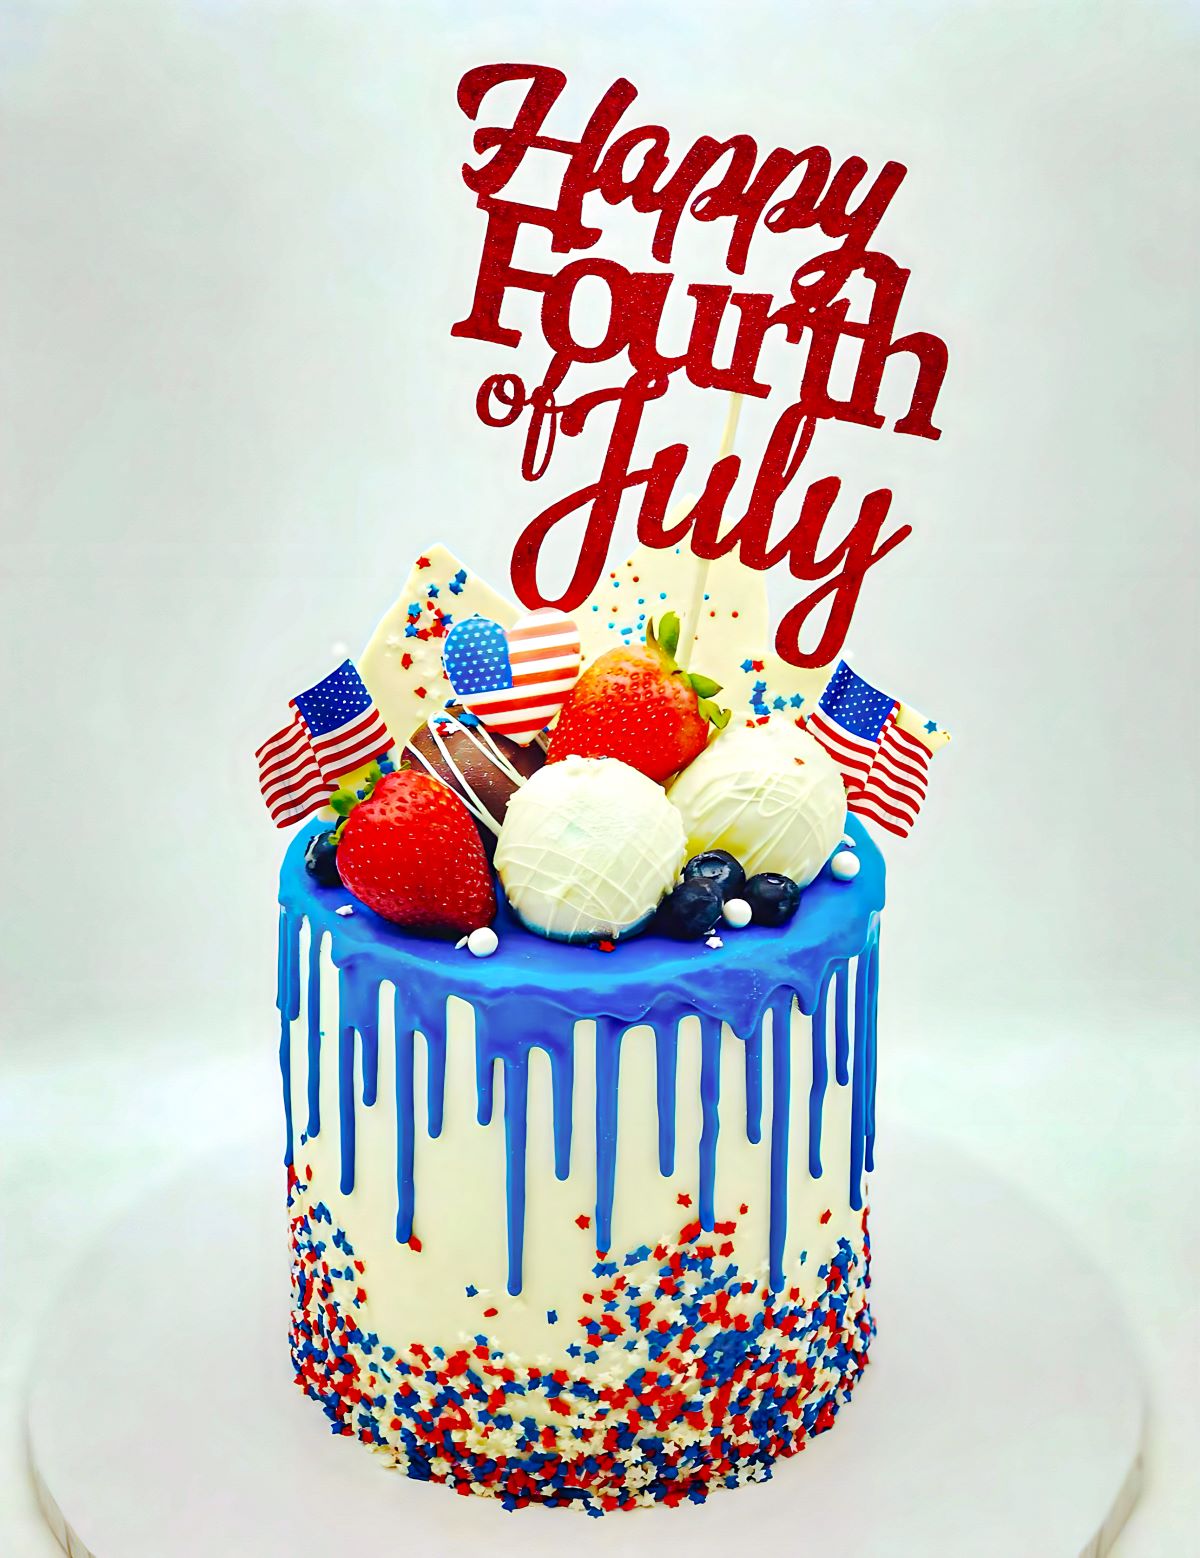 Free 4th of Cake Topper Designs: DIY Guide - Amycakes